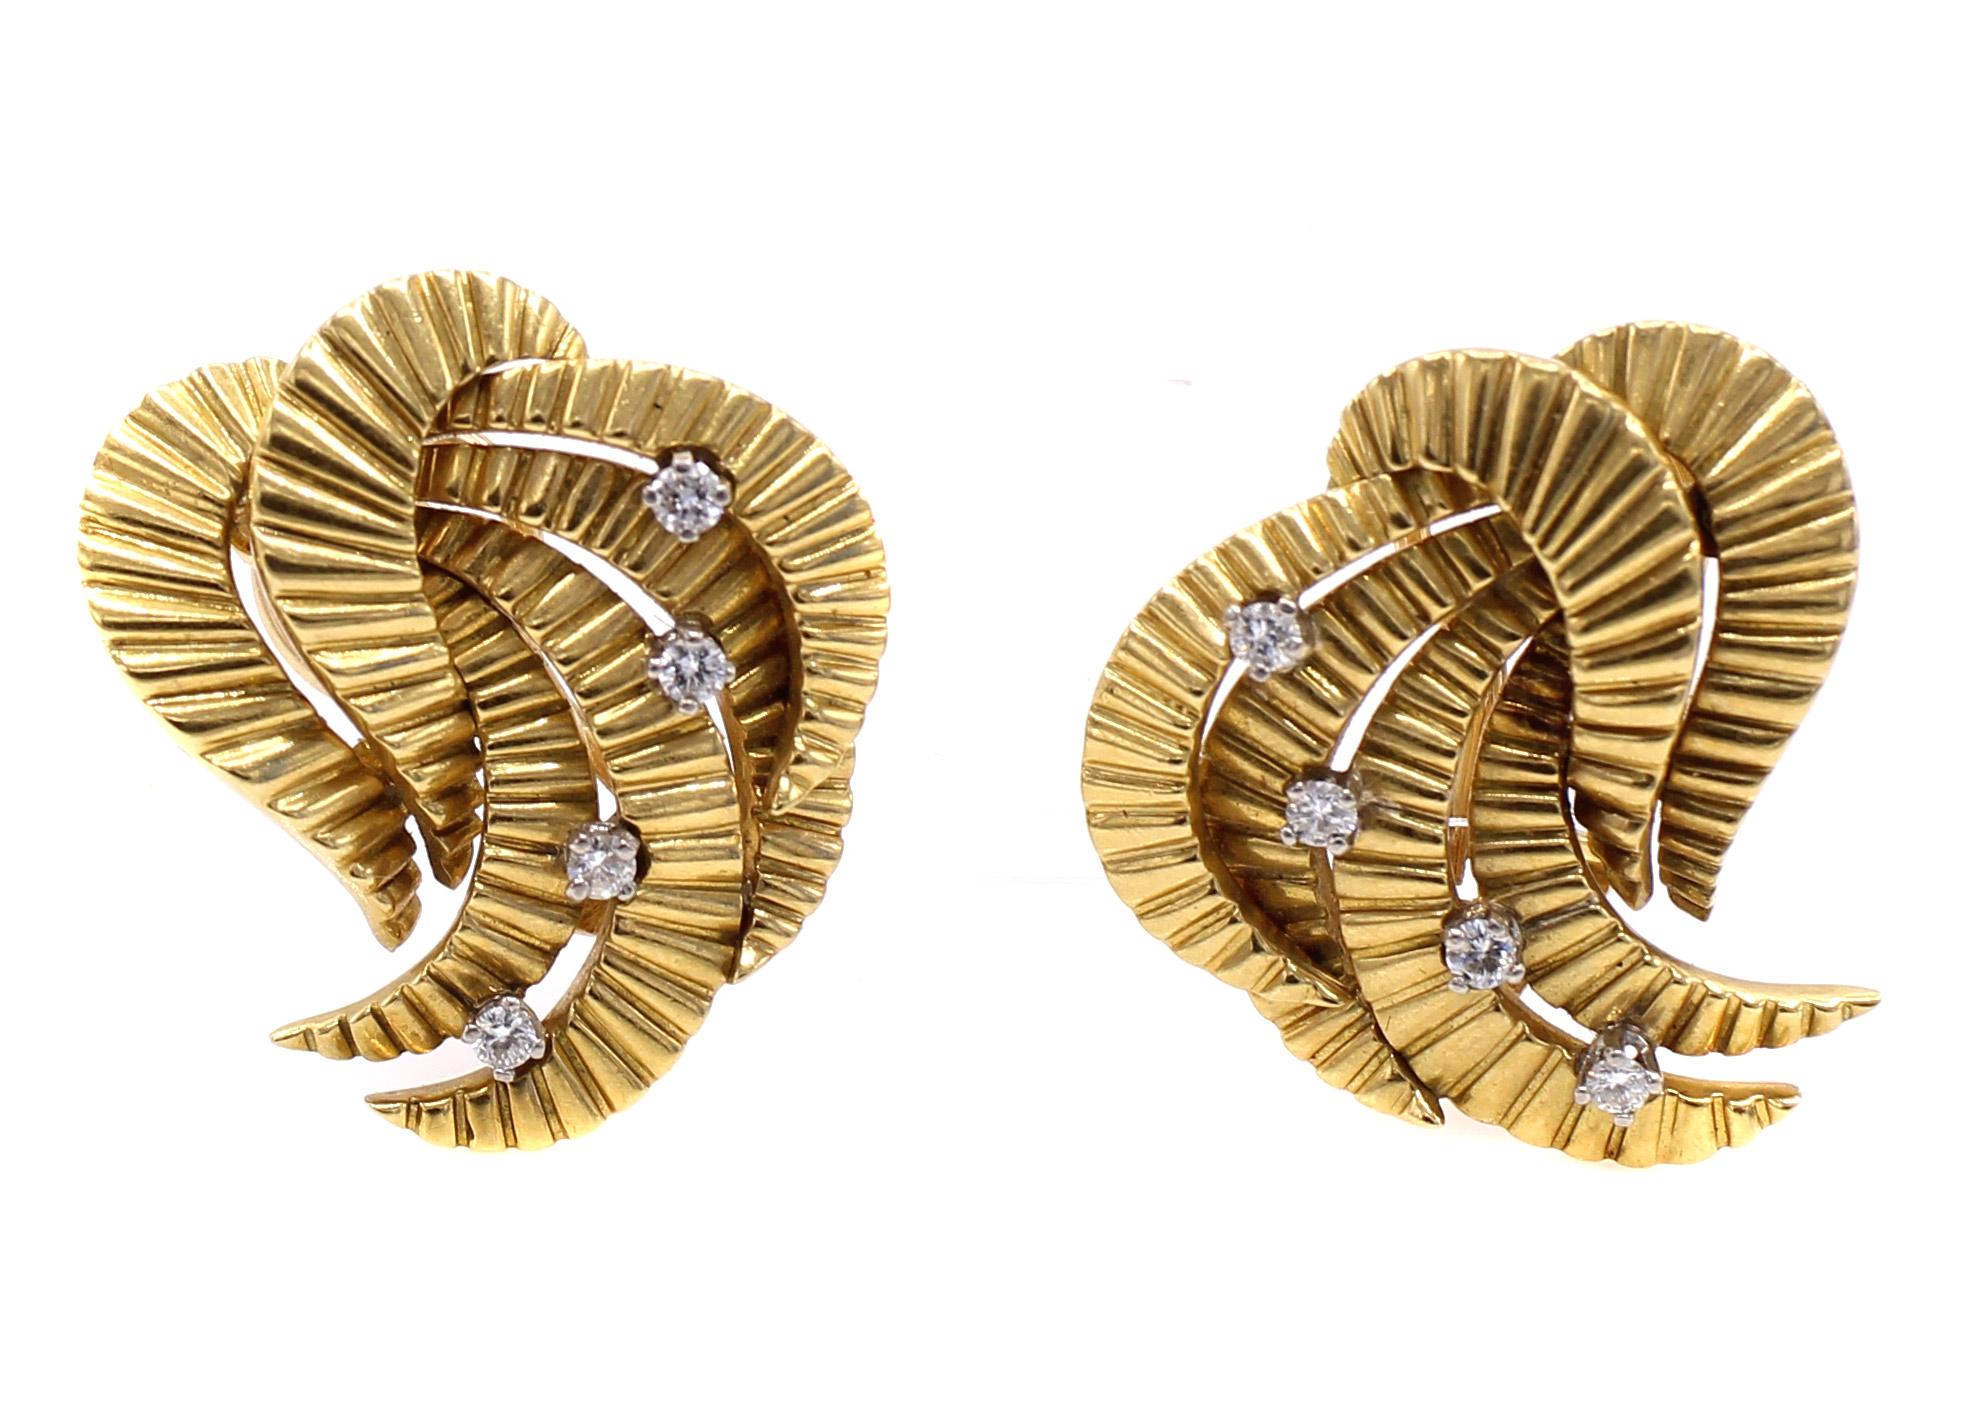 Beautifully designed and masterfully handcrafted 18 karat yellow gold and diamond ear clips from ca 1945. Multiple curved and textured elements with a feather-like design are accentuated with 4 bright white round cut diamonds on each earring. The